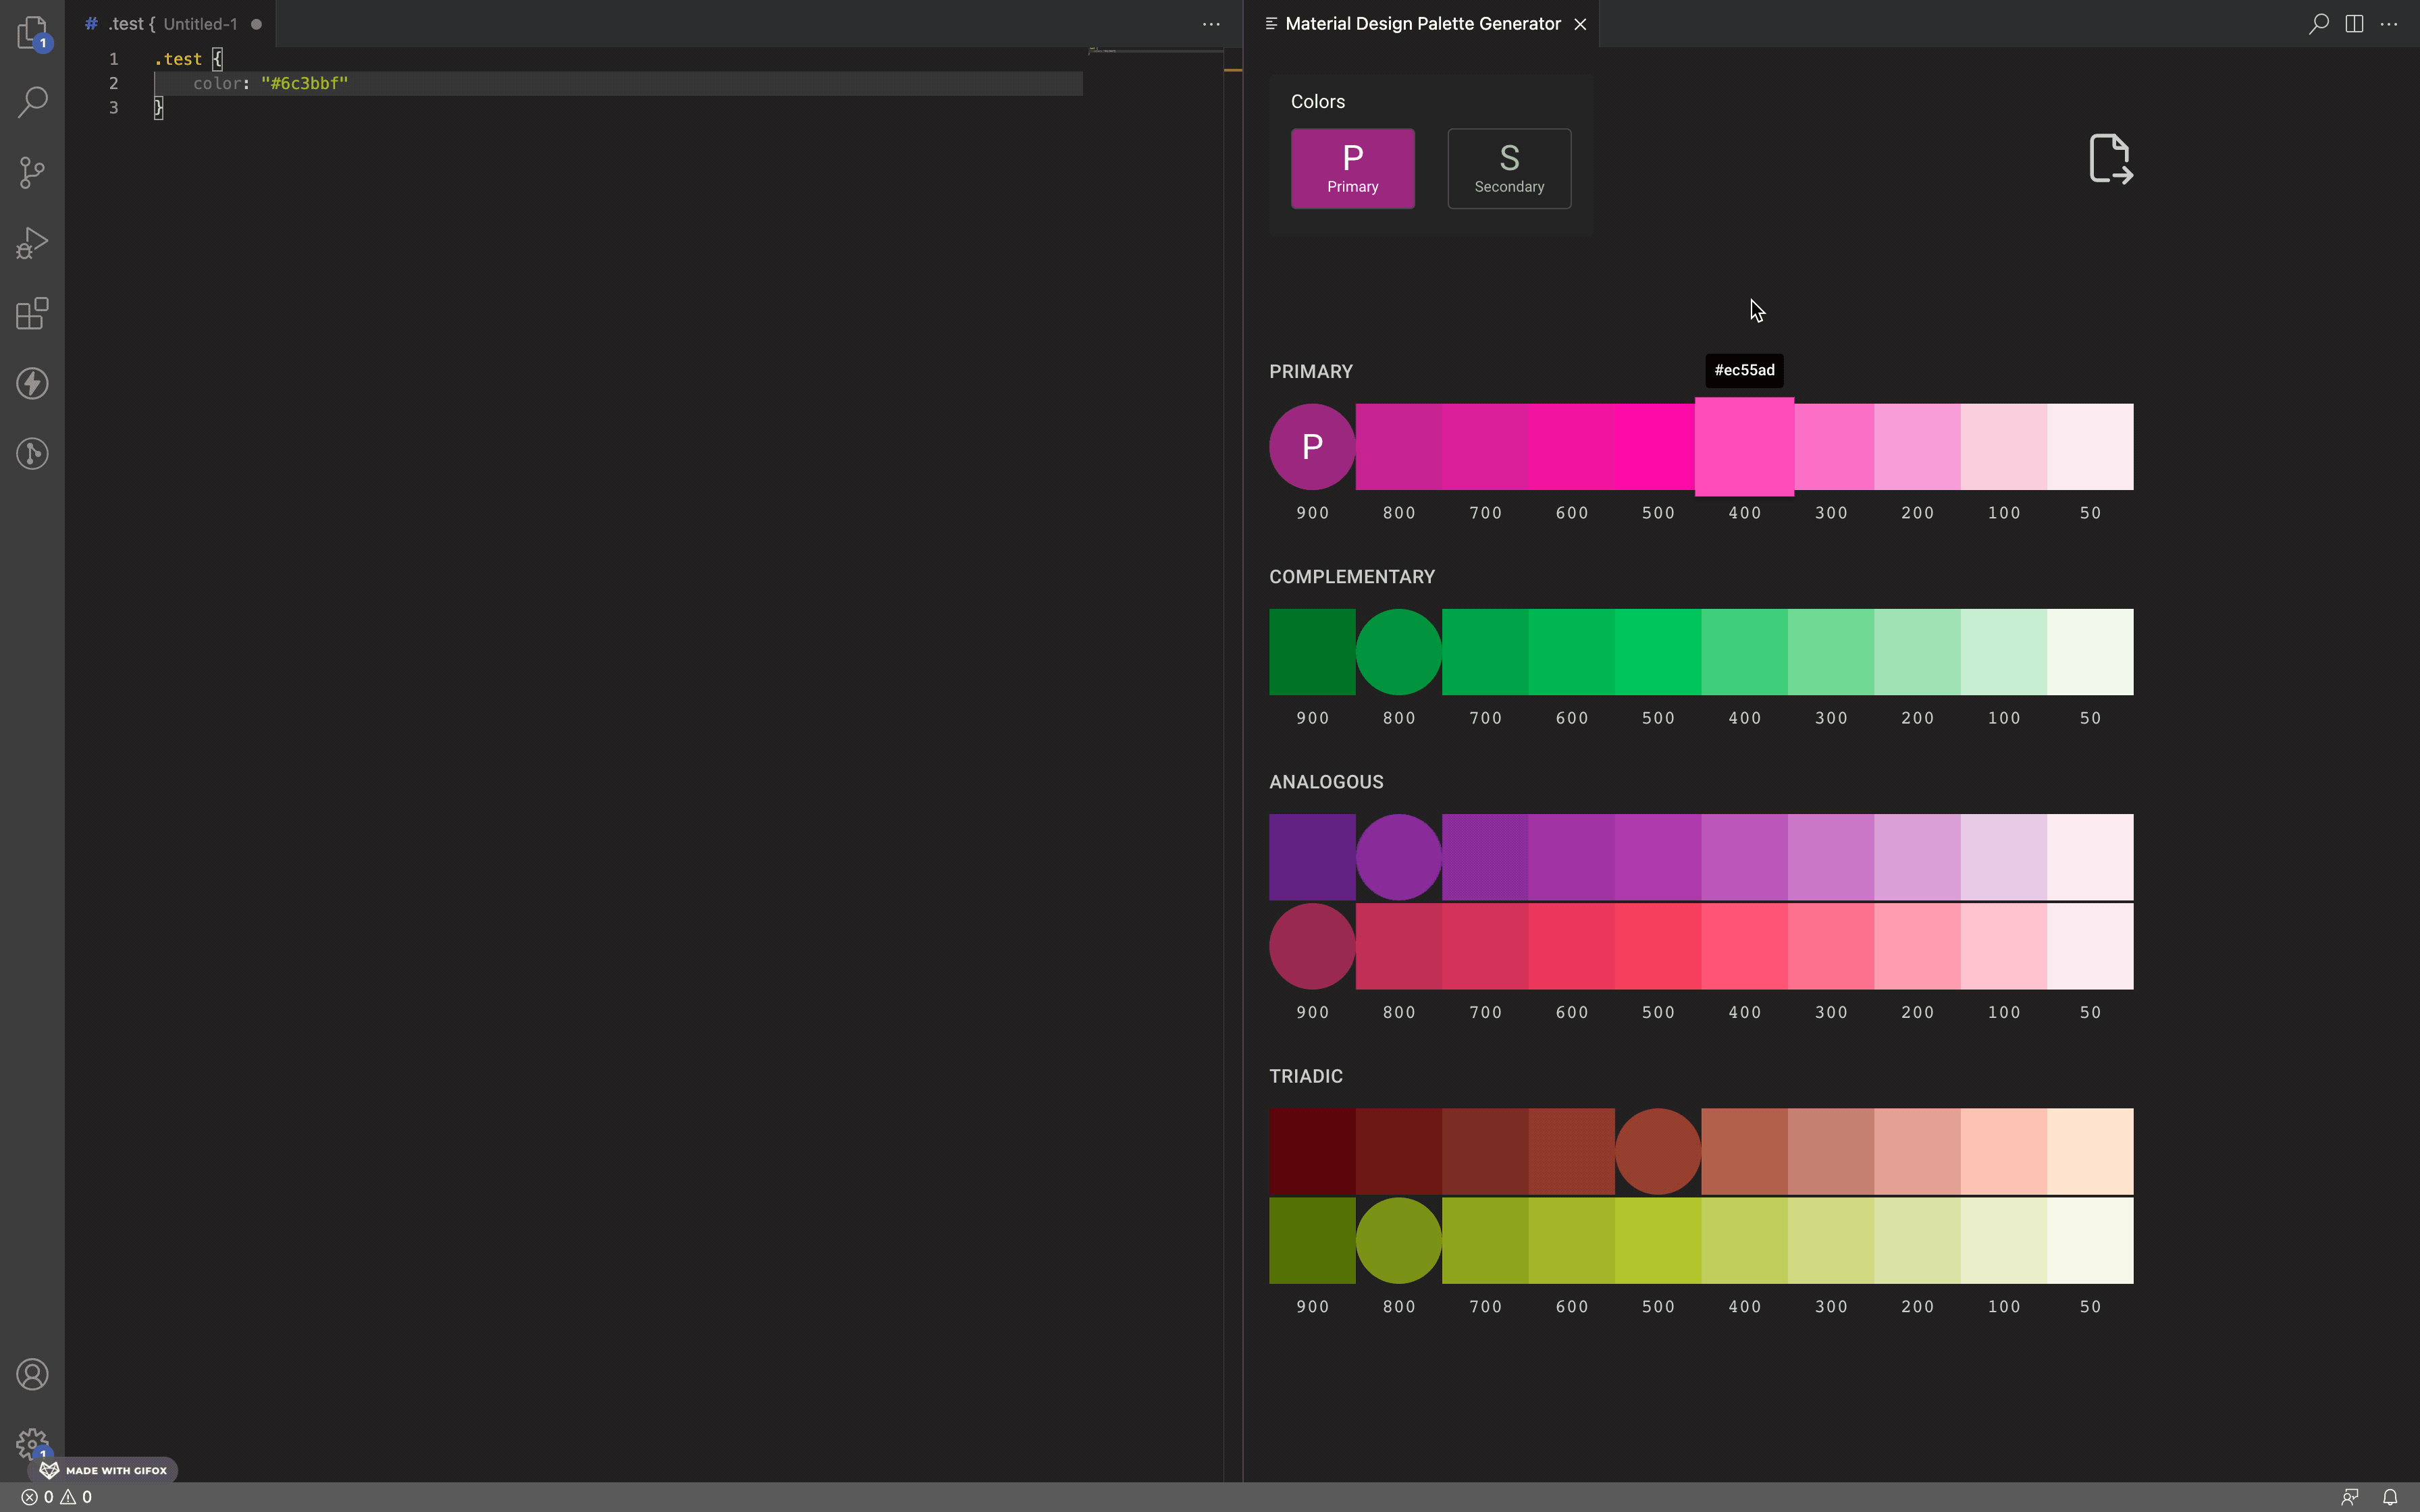 Get secondary color palette based on the provided secondary color